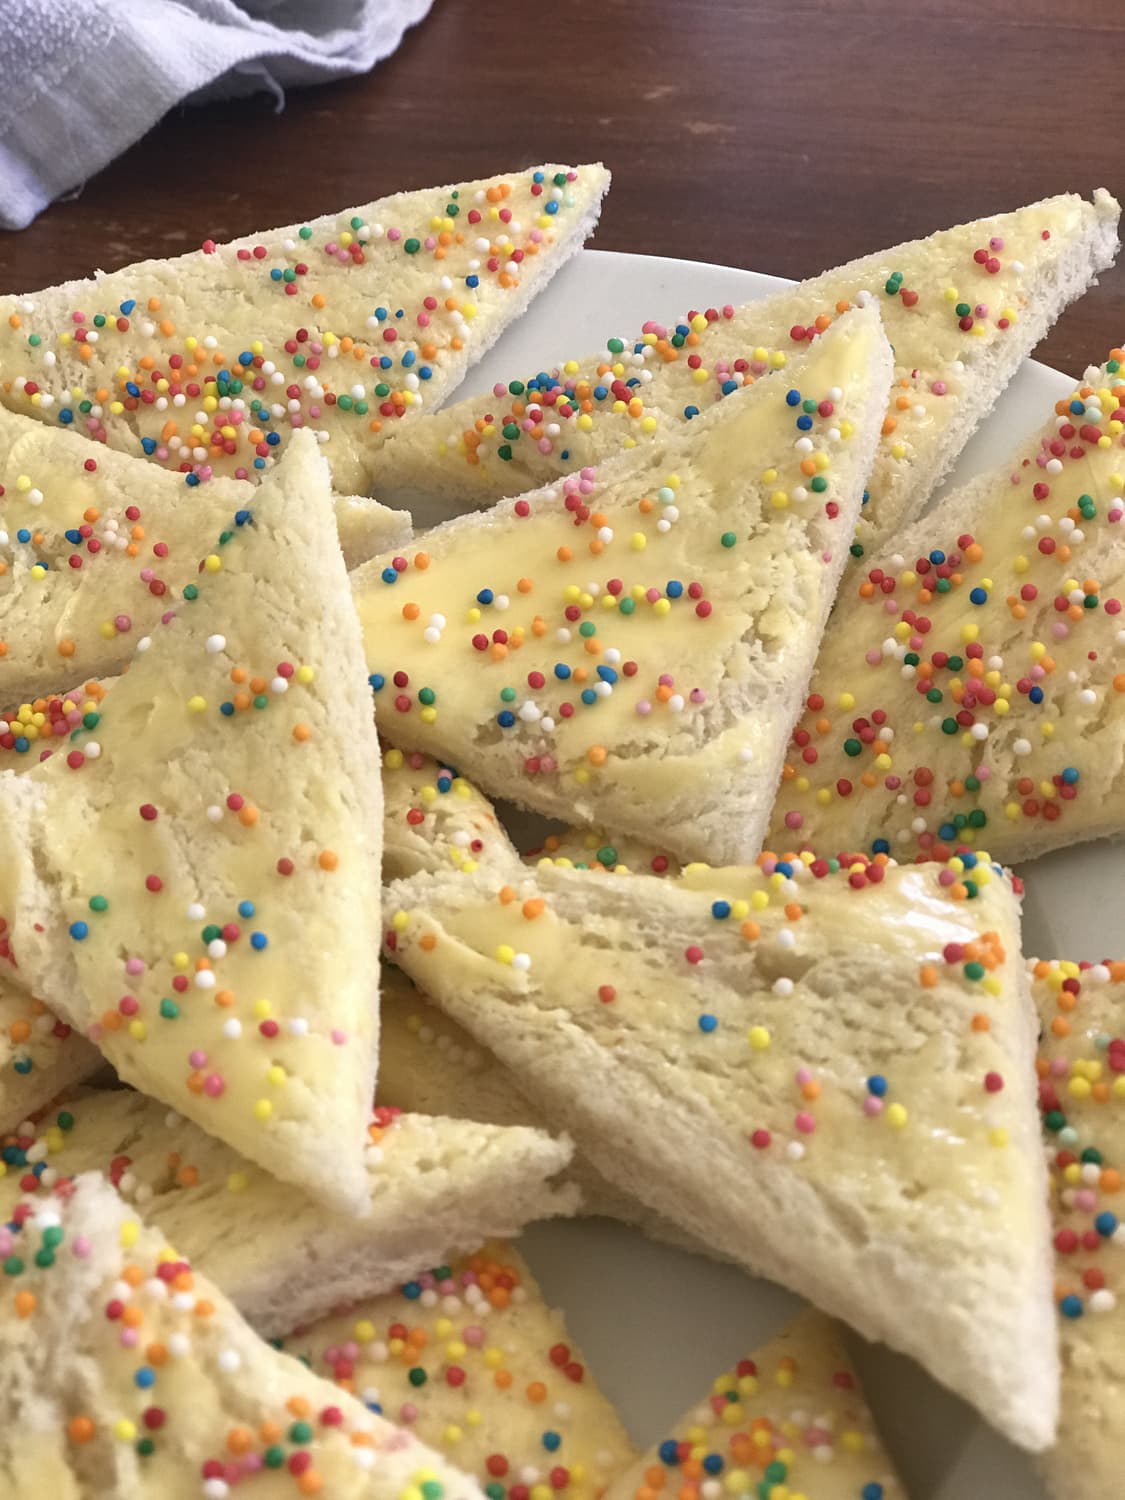 Fairy bread at a young child’s birthday party